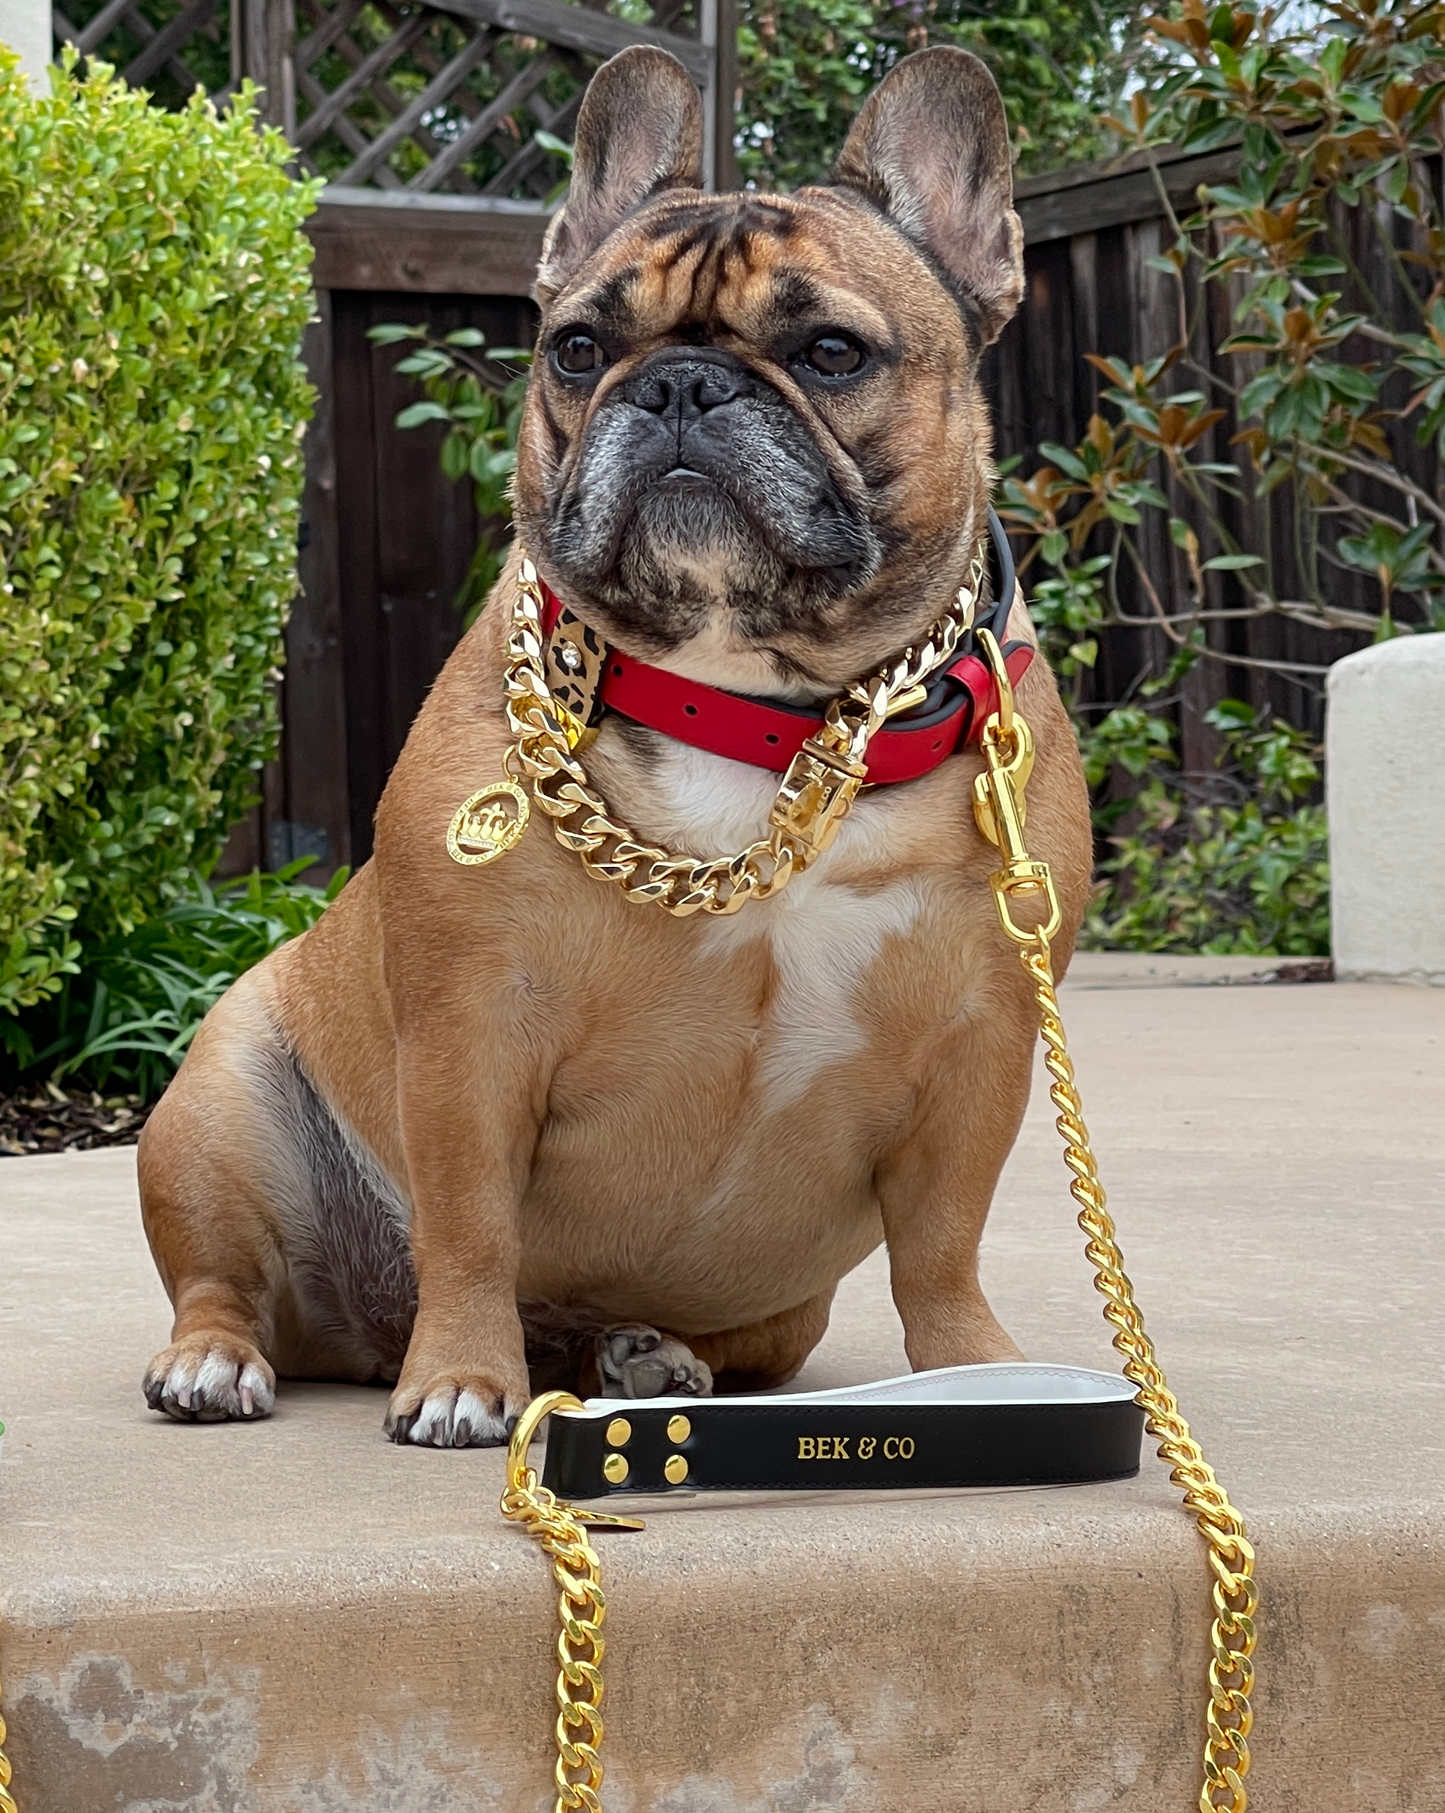 Fat French Bulldog chilling by the pool with Bek & Co Red Regal dog collar, gold chain and matching gold chain leash